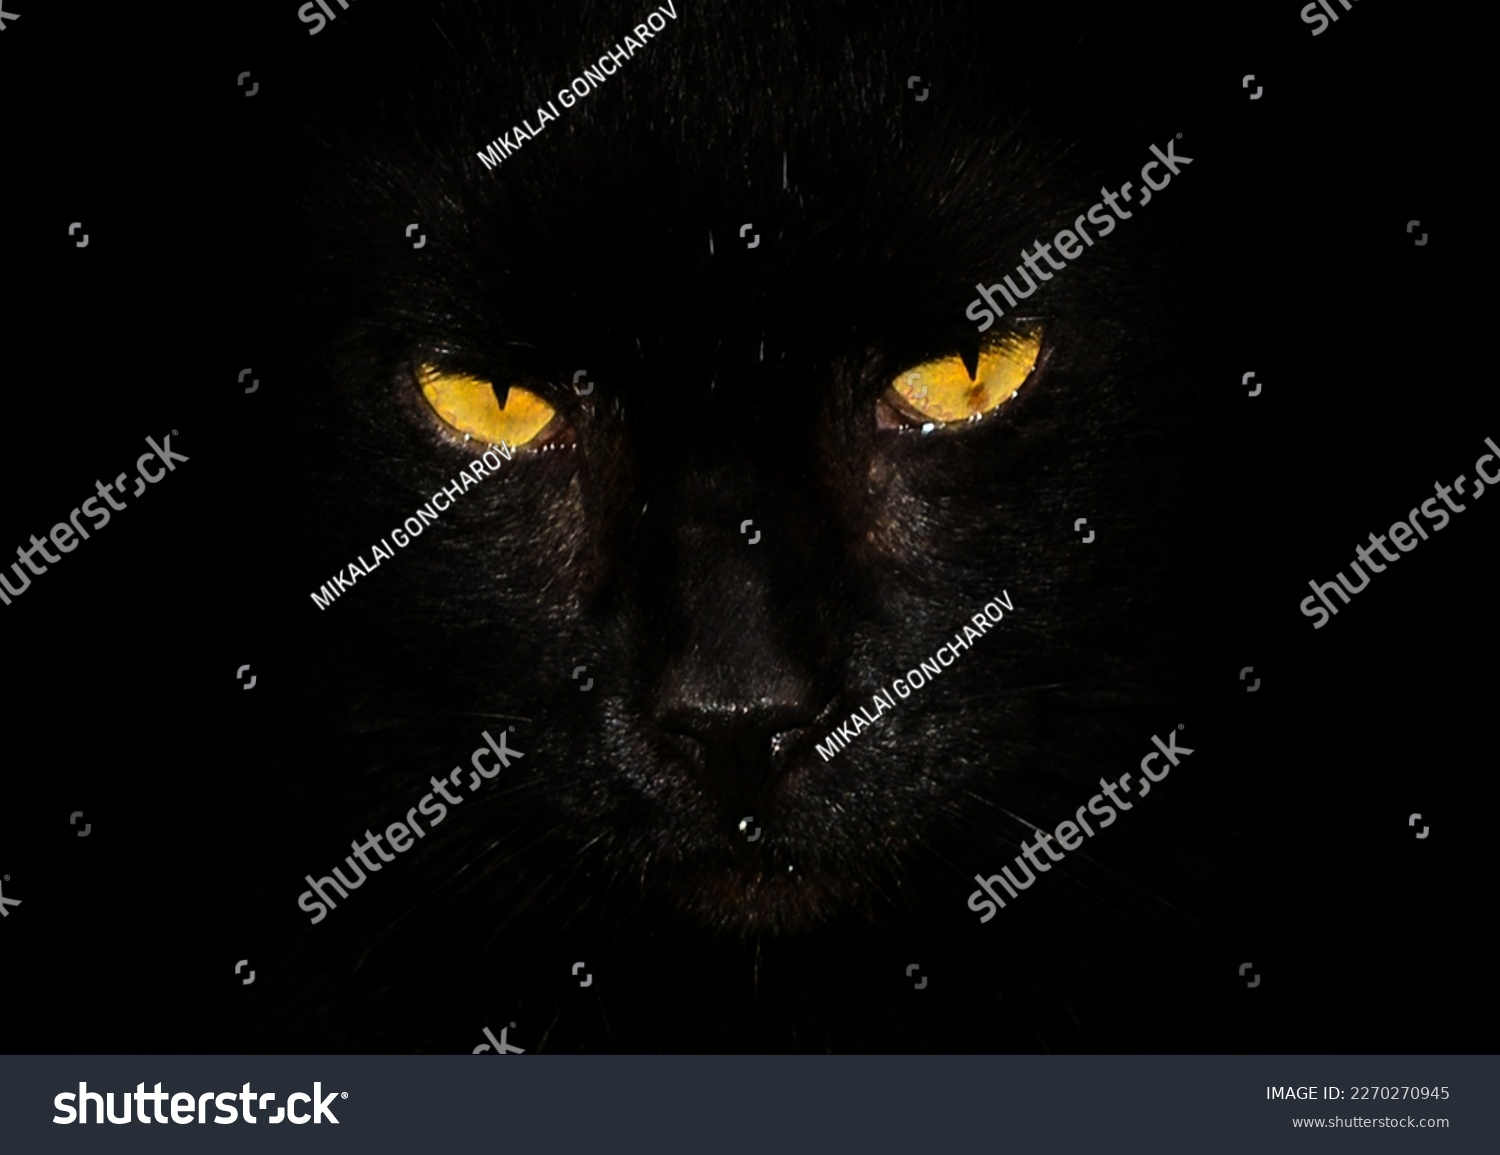 Black cat on a black background with bright yellow eyes #2270270945